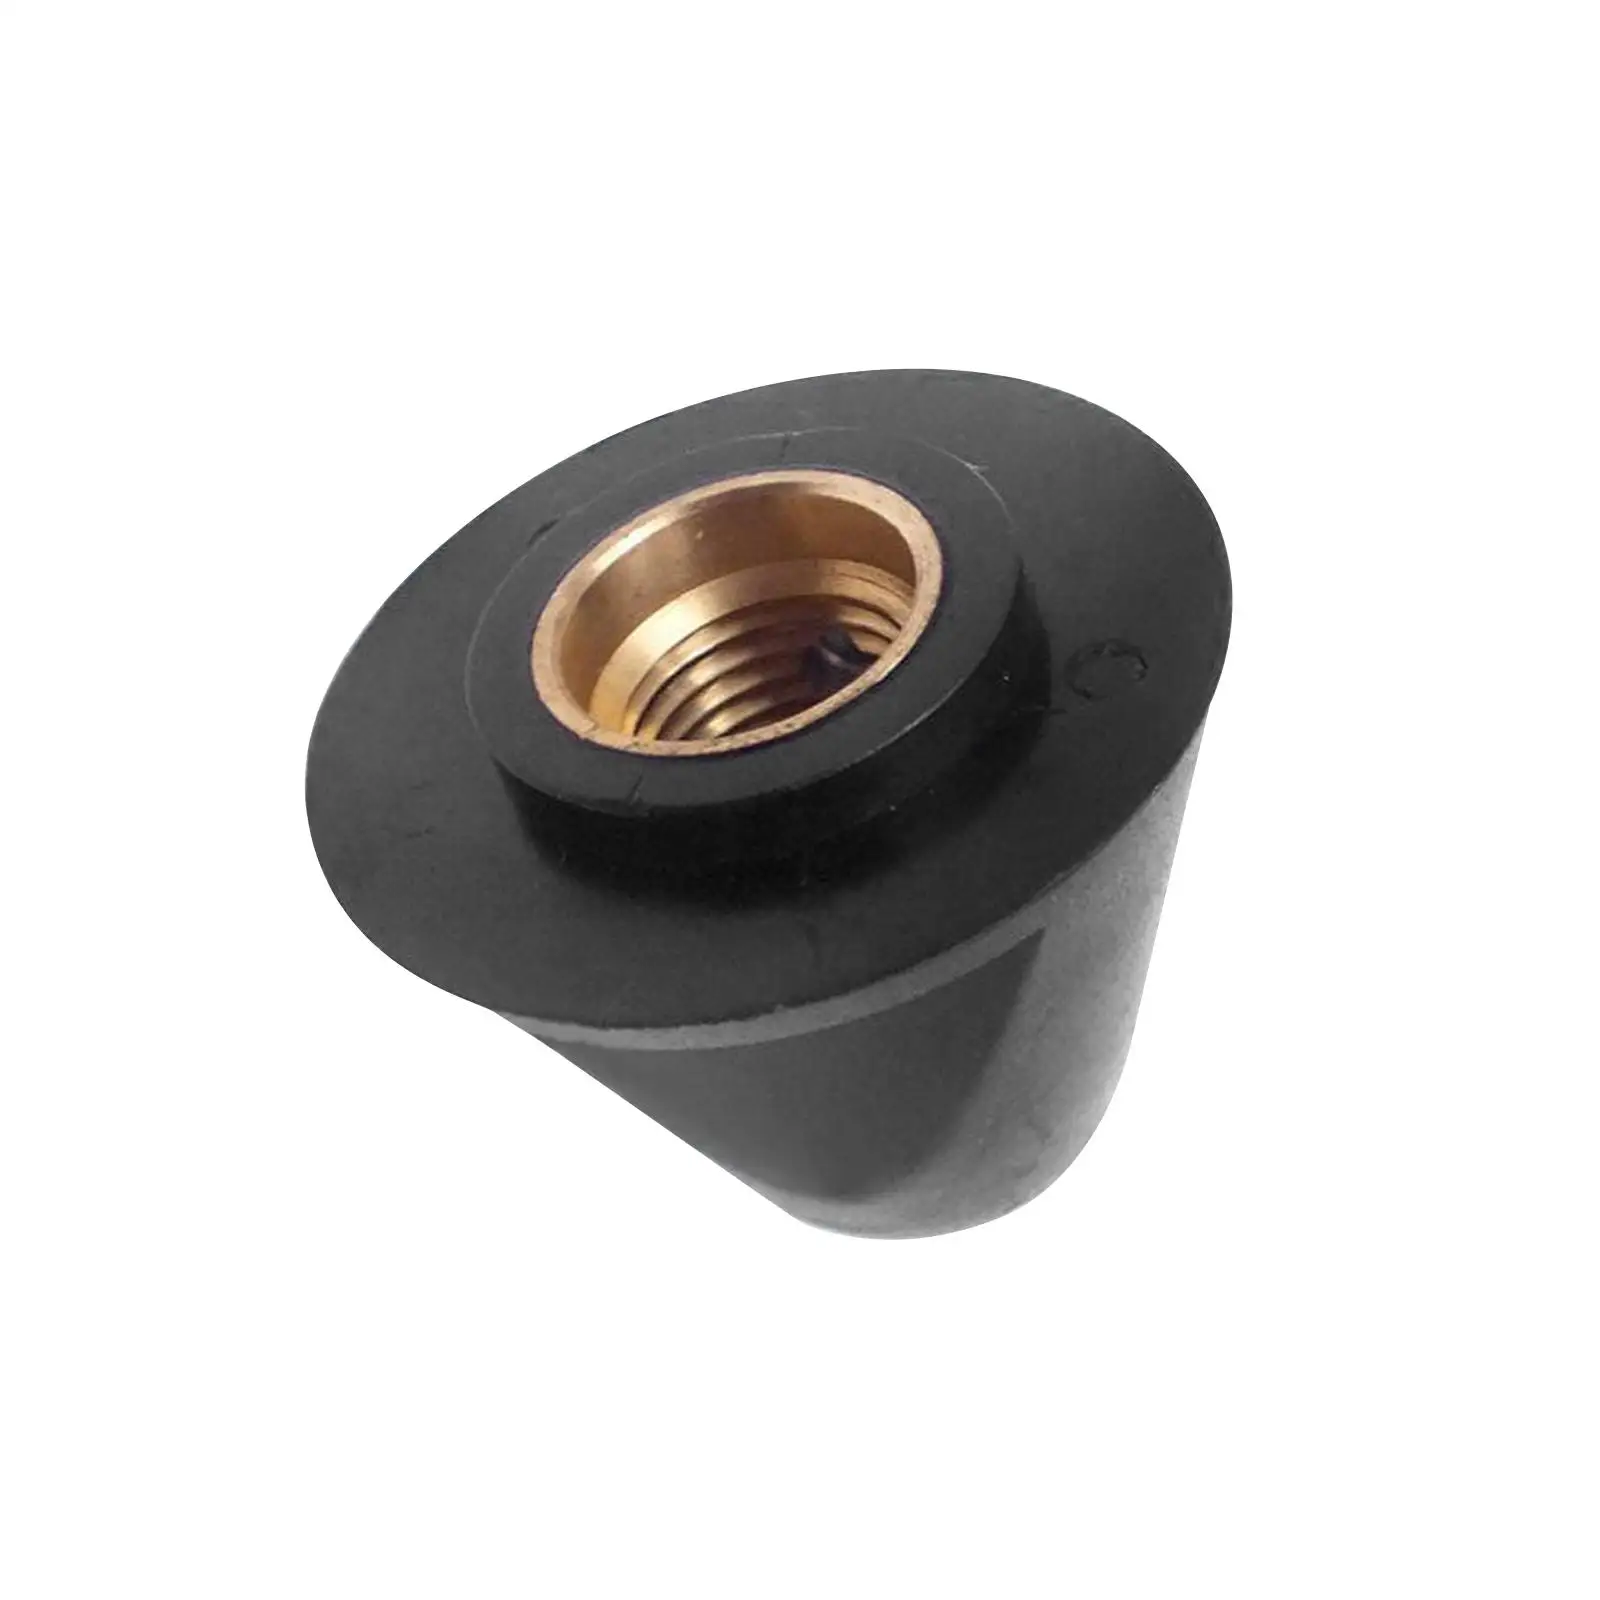 Propeller Prop Nut 647-45616-02-00 for Yamaha Outboard 4HP 5HP 2